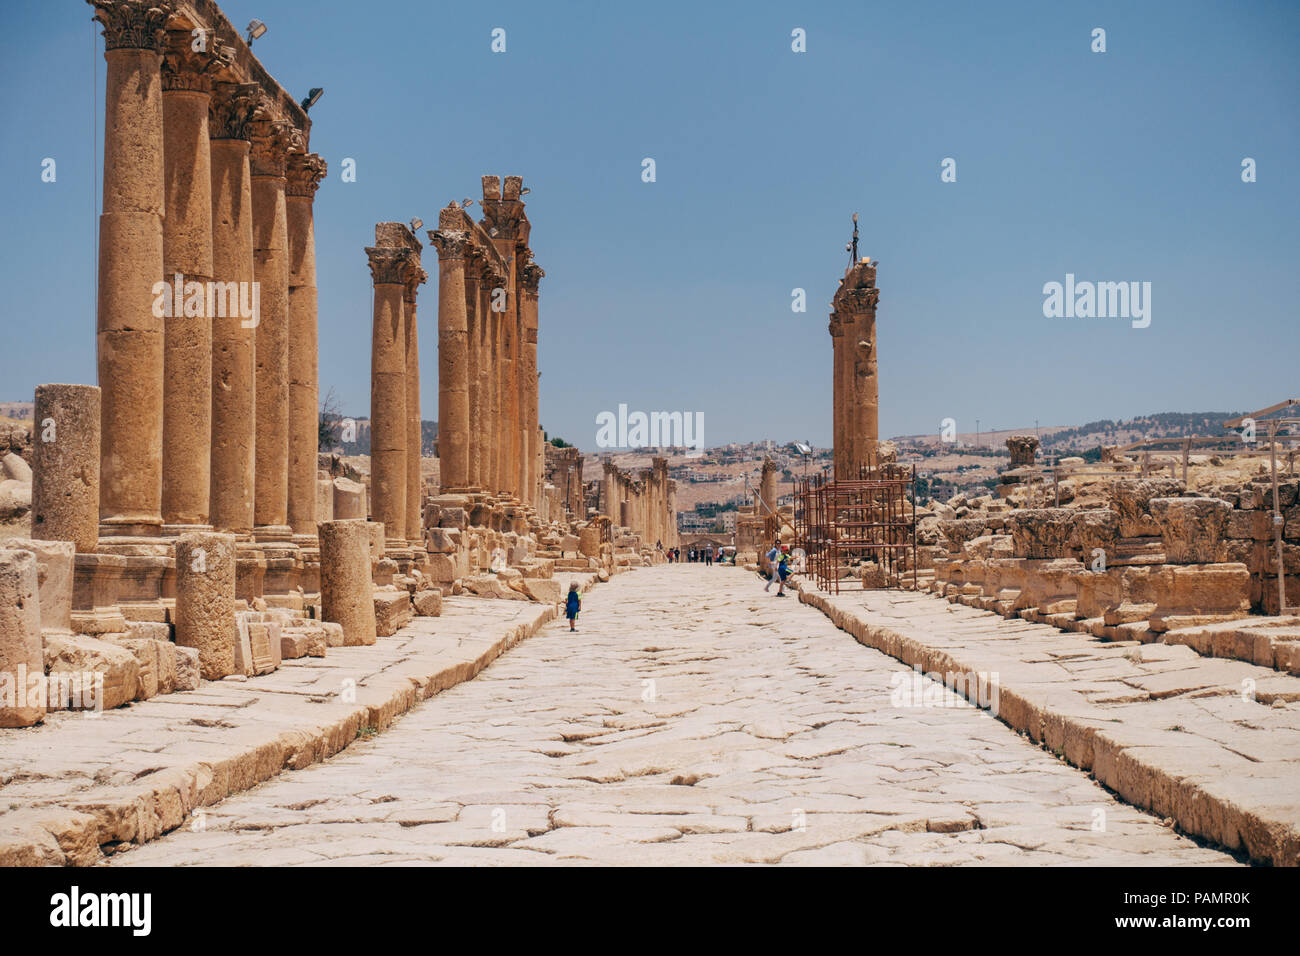 old ancient Greco-Roman columns line cobblestone streets on a warm summers day in Jerash, Jordan Stock Photo